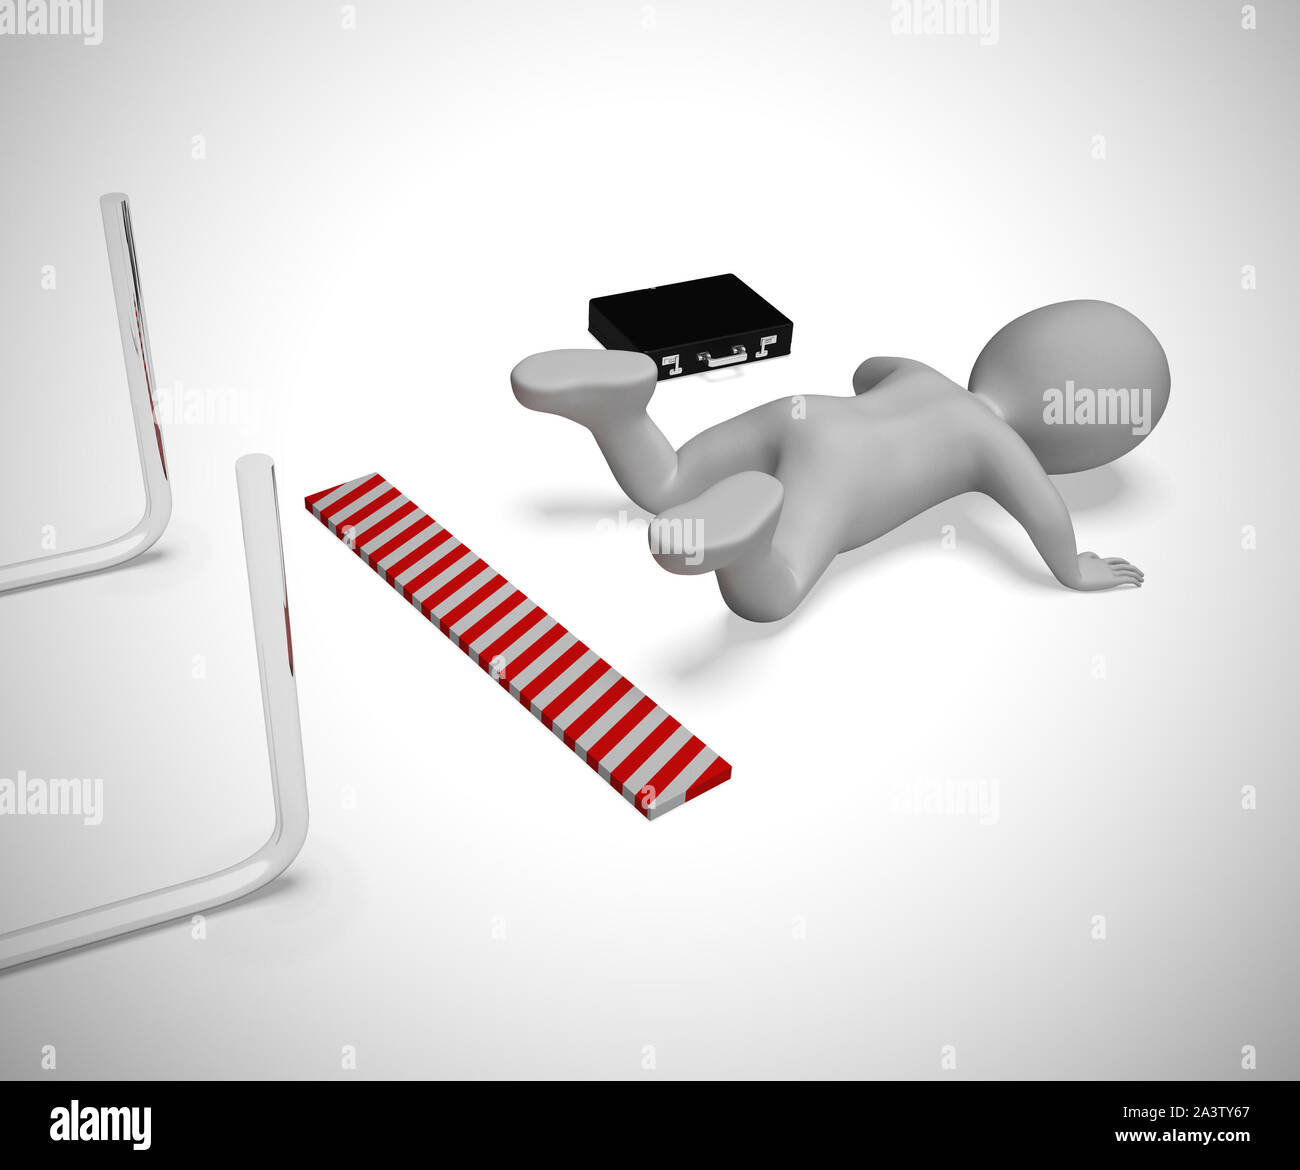 Run of bad luck depicted by a man falling over a hurdle. Disappointment and failure from the accident - 3d illustration Stock Photo